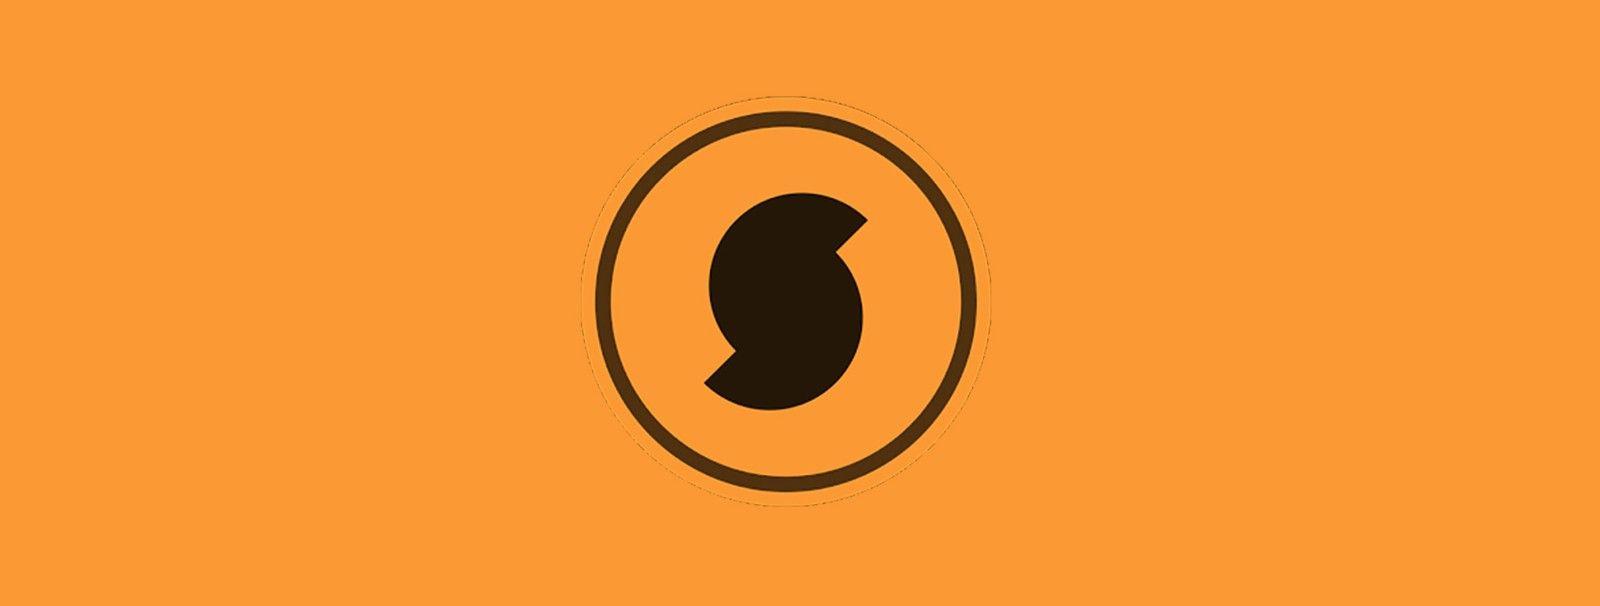 SoundHound Logo - Why SoundHound, our Portfolio company was named One of 2017's Most